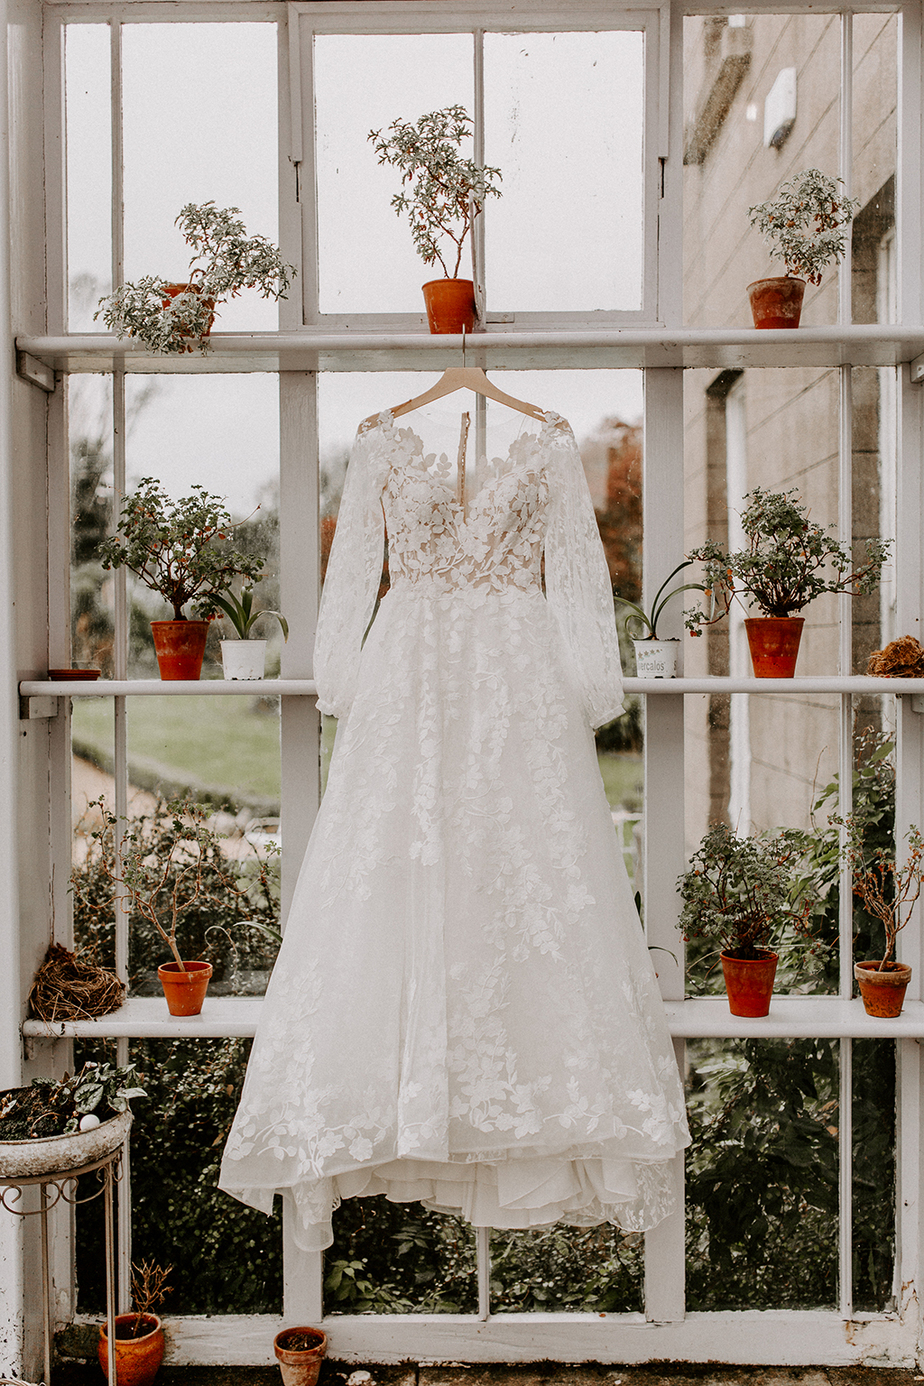 What Can I Do if I’ve Changed My Mind on My Wedding Dress?